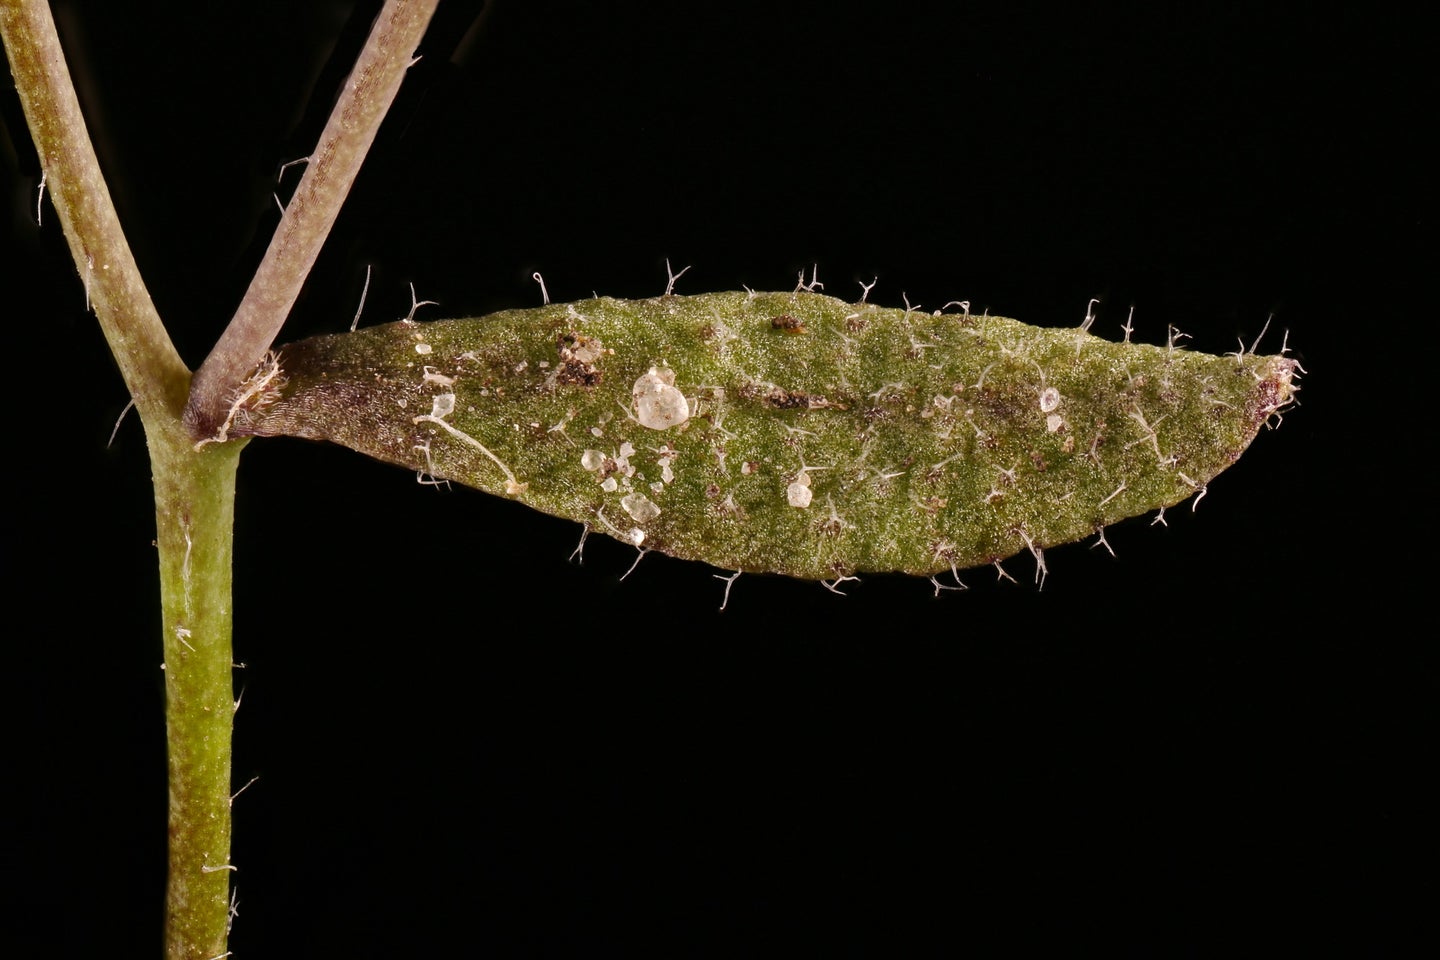 Thale cress plant leaf shown with defenses and regeneration against a black background